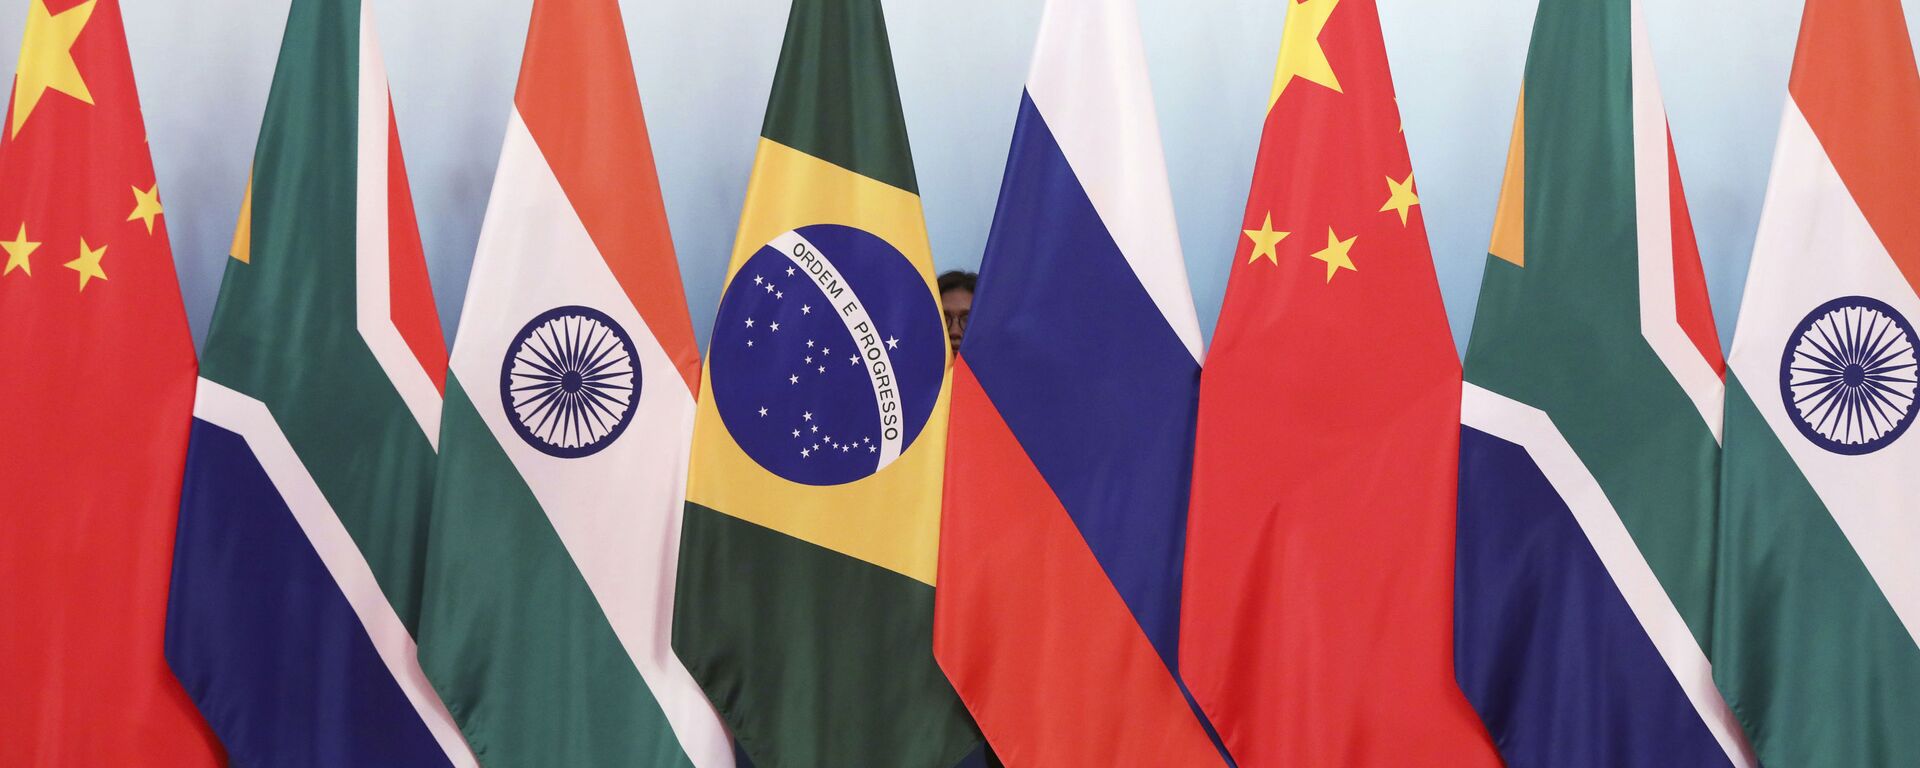 Staff worker stands behinds national flags of Brazil, Russia, China, South Africa and India to tidy the flags ahead of a group photo during the BRICS Summit at the Xiamen International Conference and Exhibition Center in Xiamen, southeastern China's Fujian Province, Monday, Sept. 4, 2017. - Sputnik International, 1920, 18.07.2022